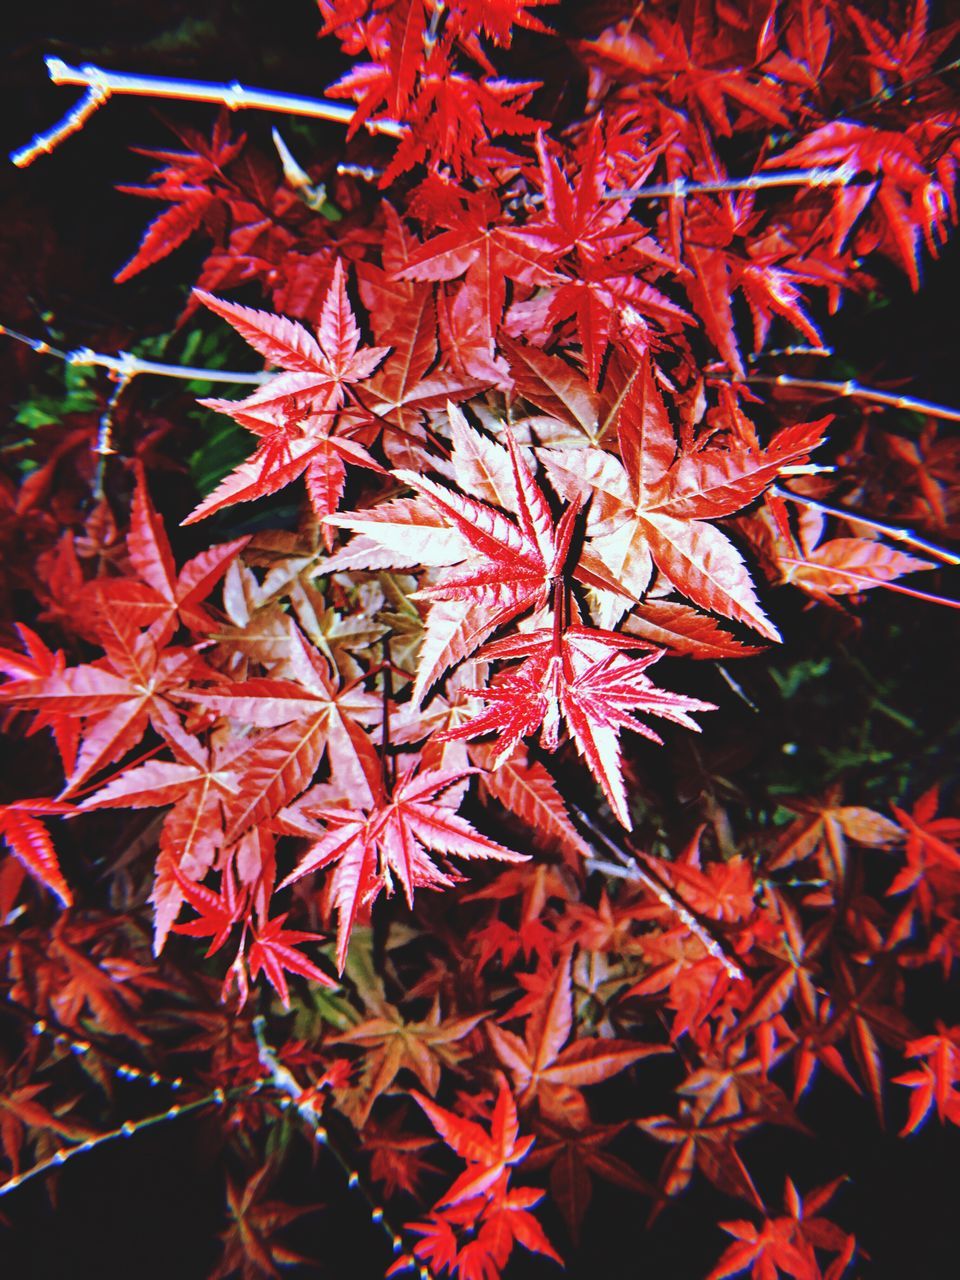 CLOSE-UP OF RED LEAVES ON PLANT